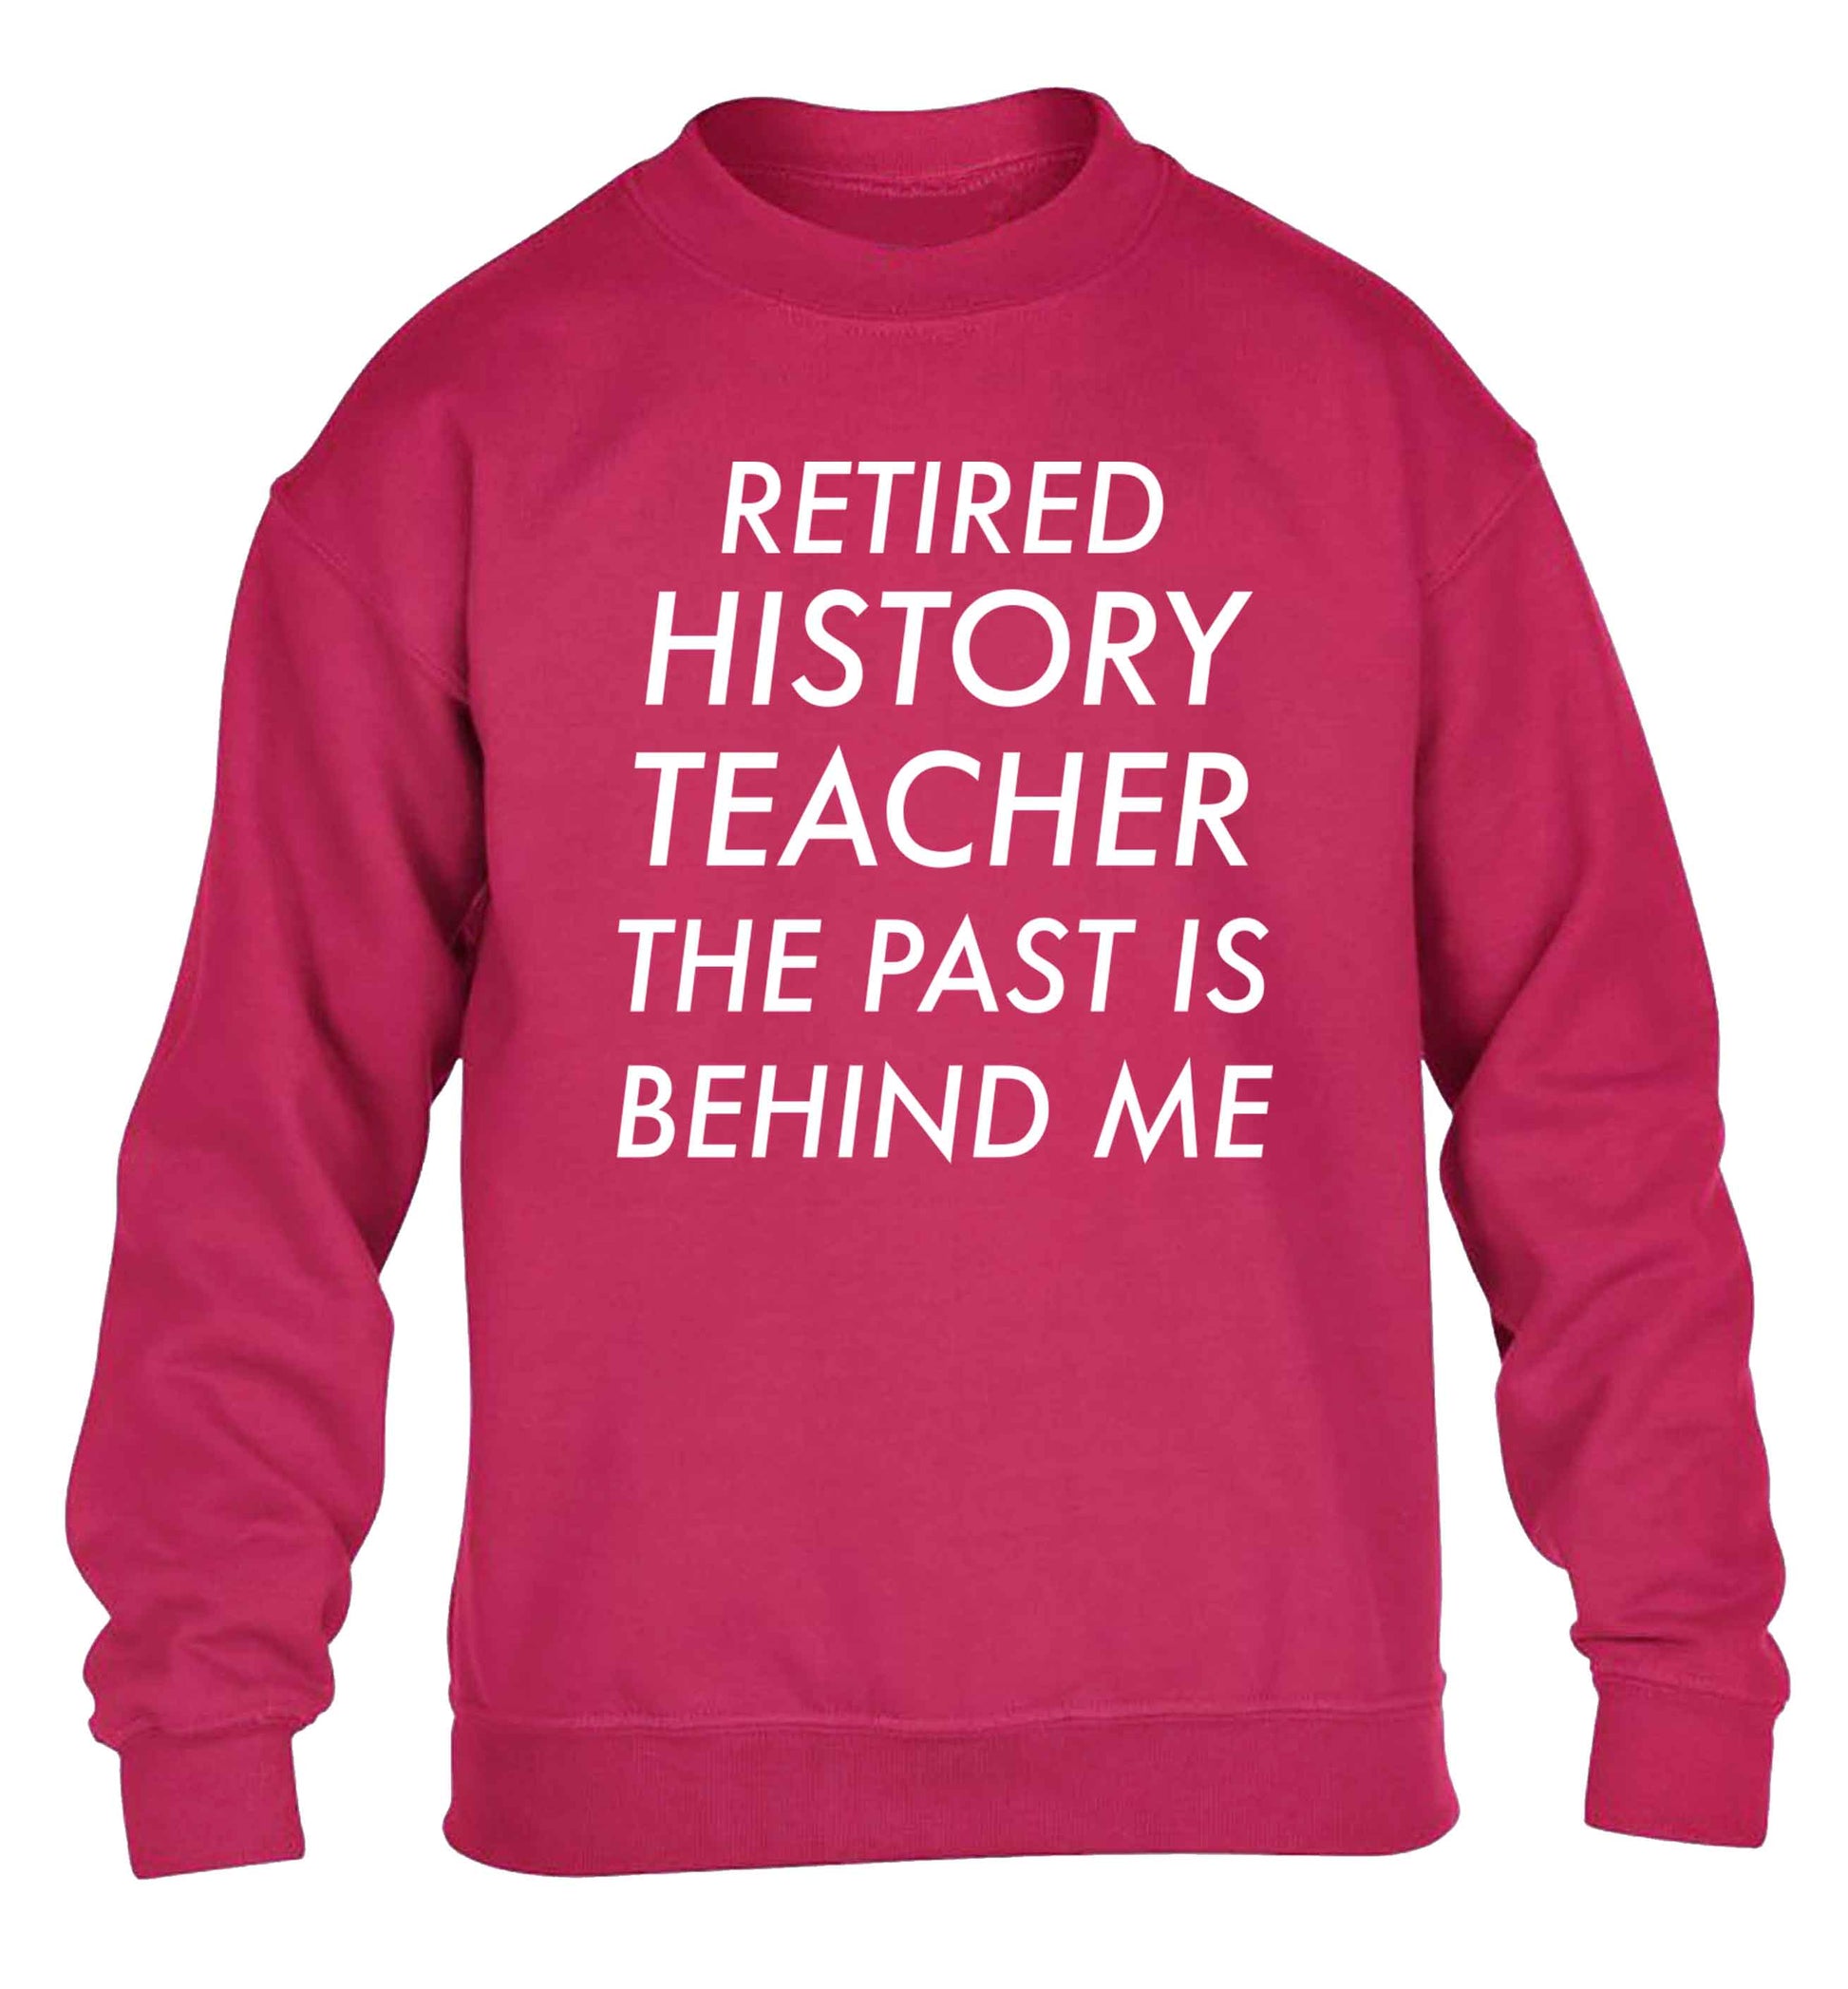 Retired history teacher the past is behind me children's pink sweater 12-13 Years